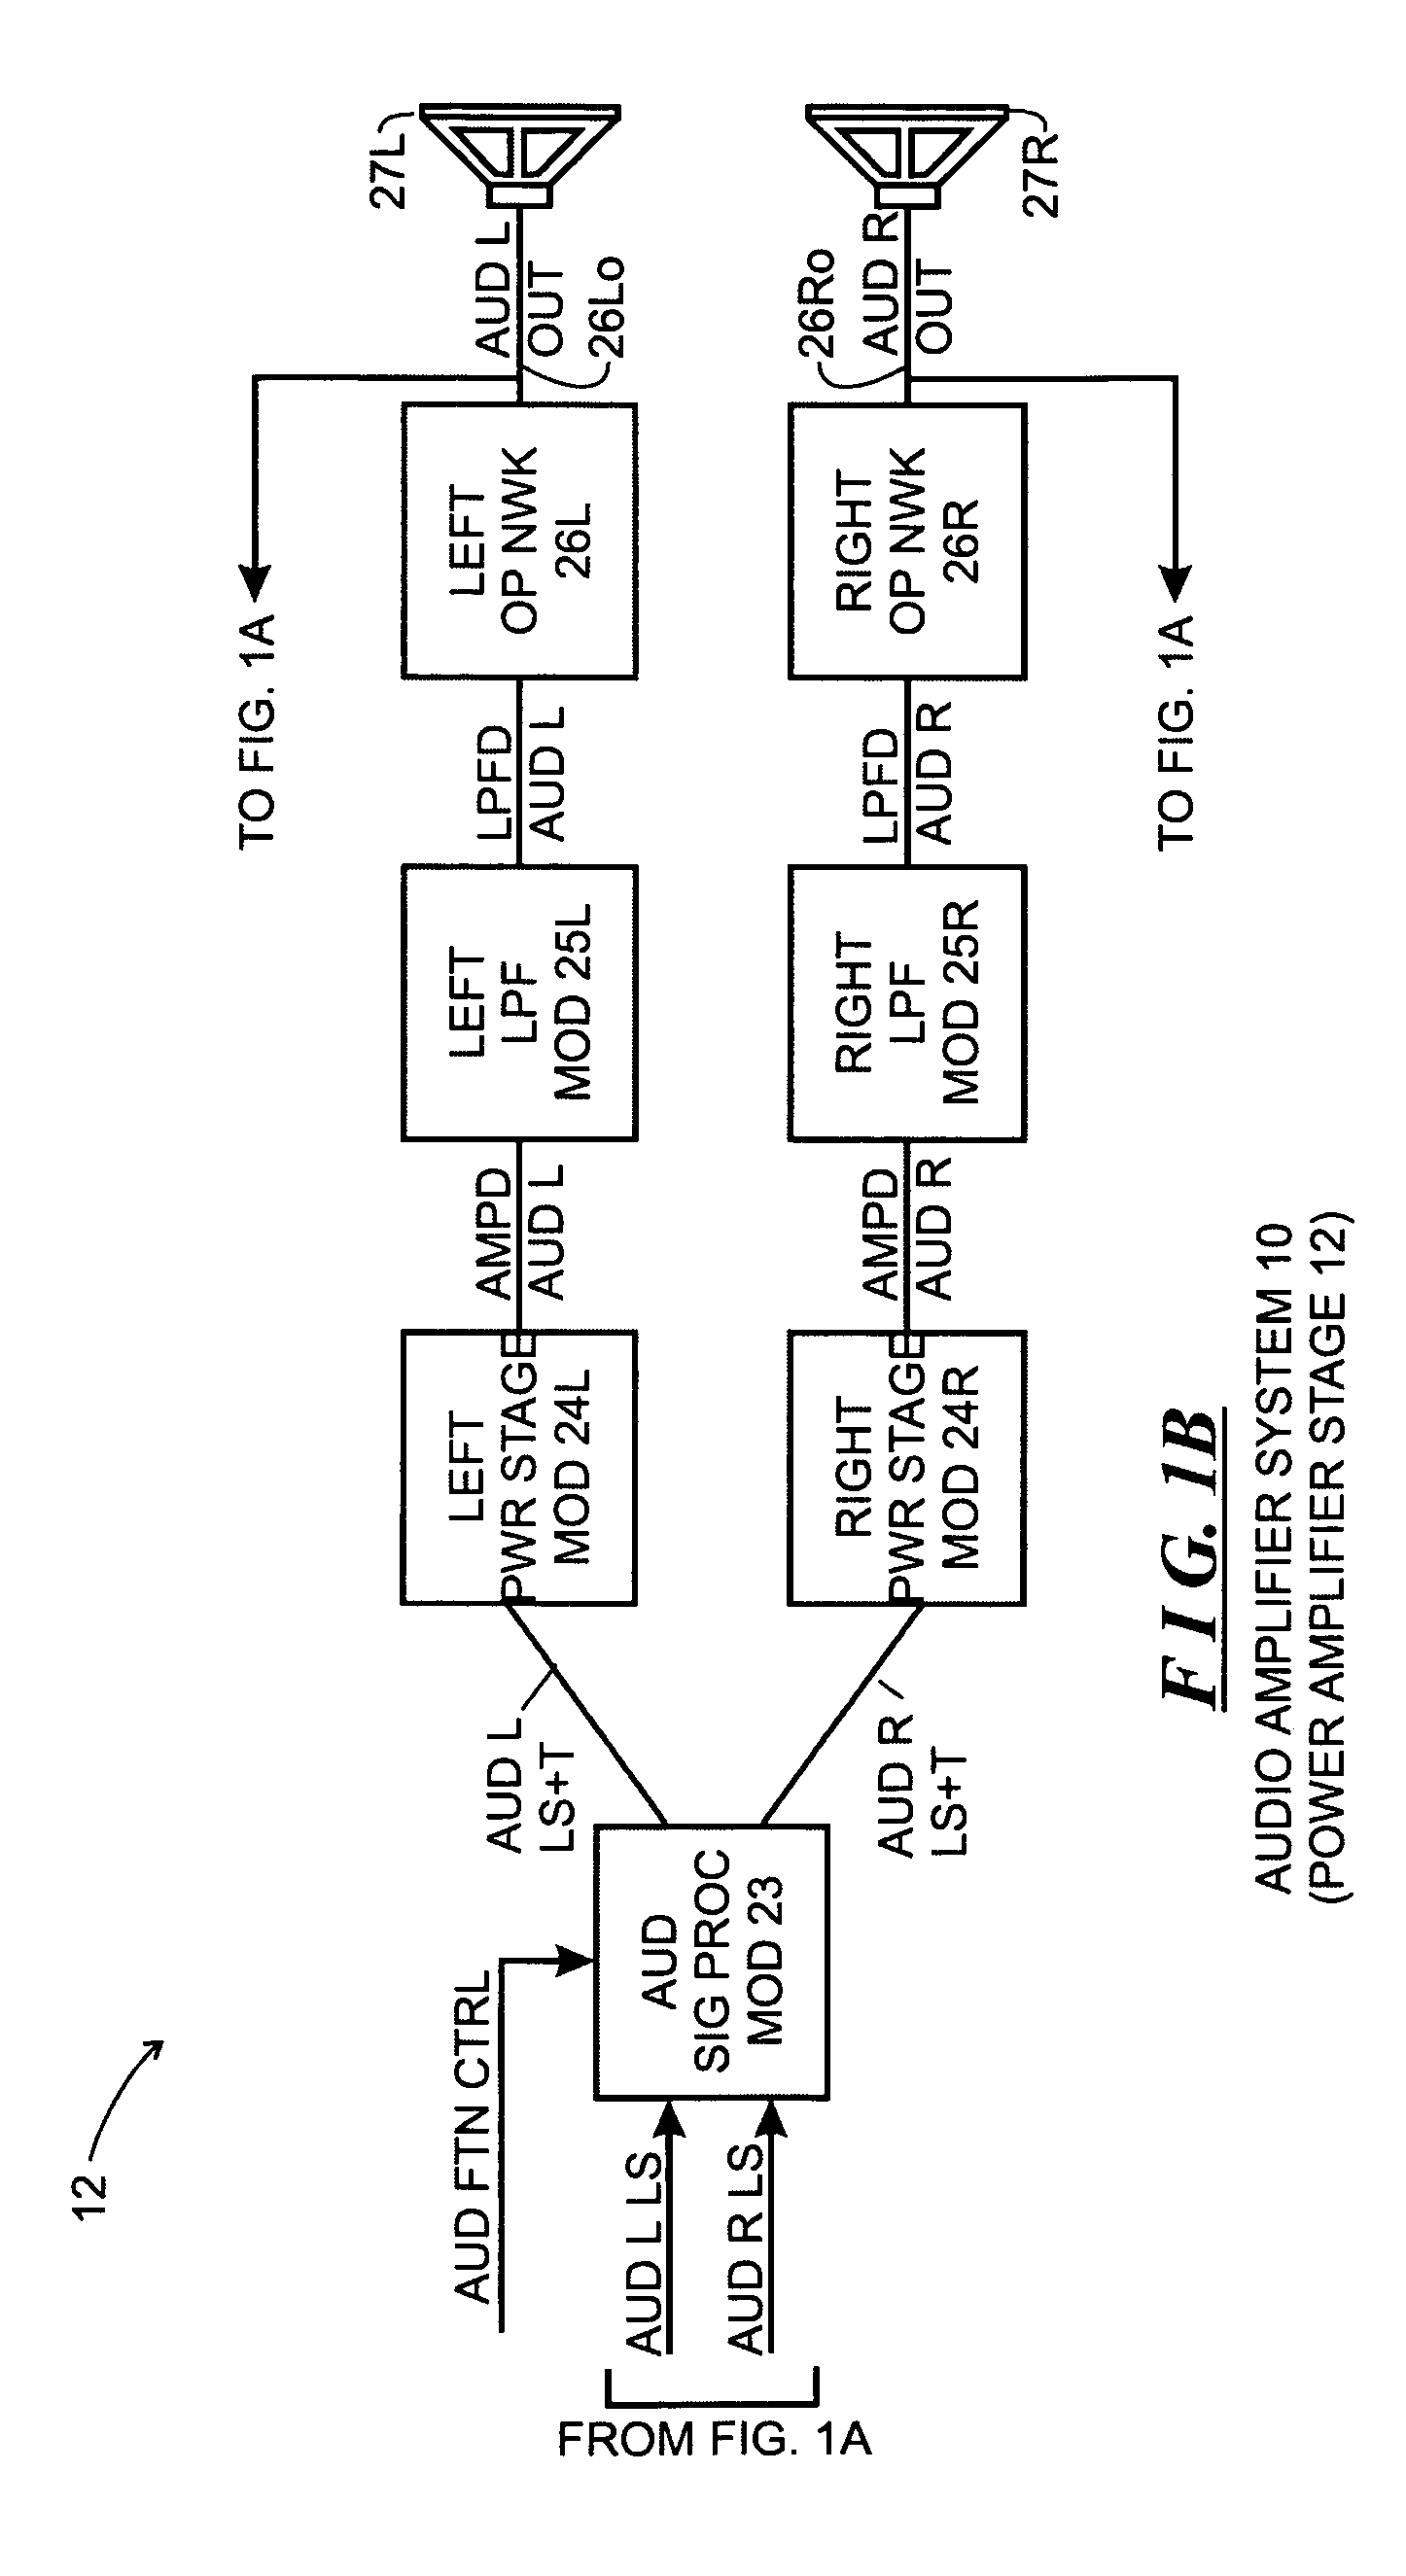 System and method for minimizing DC offset in outputs of audio power amplifiers